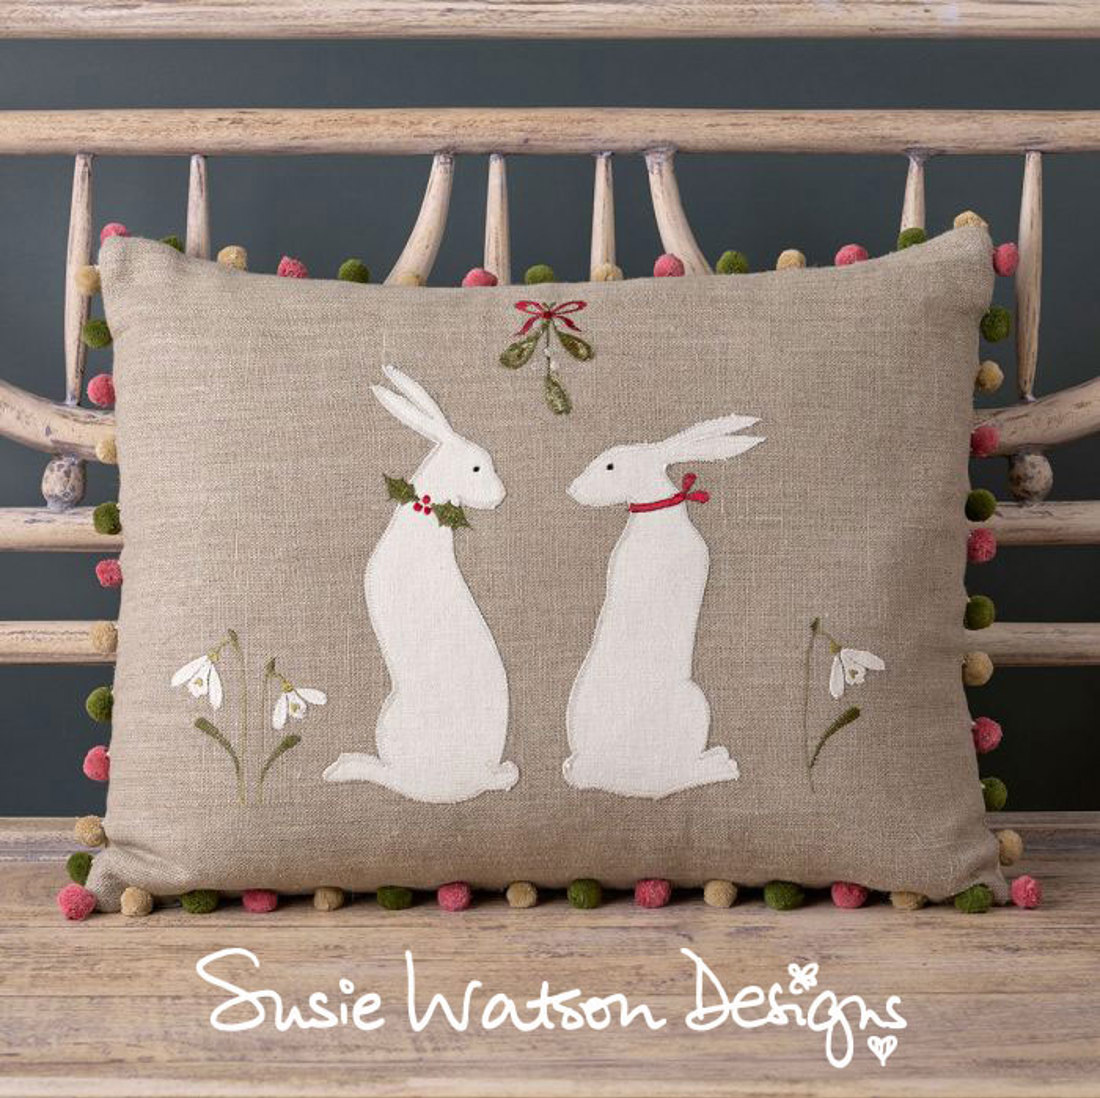 Cushion with rabbits on it